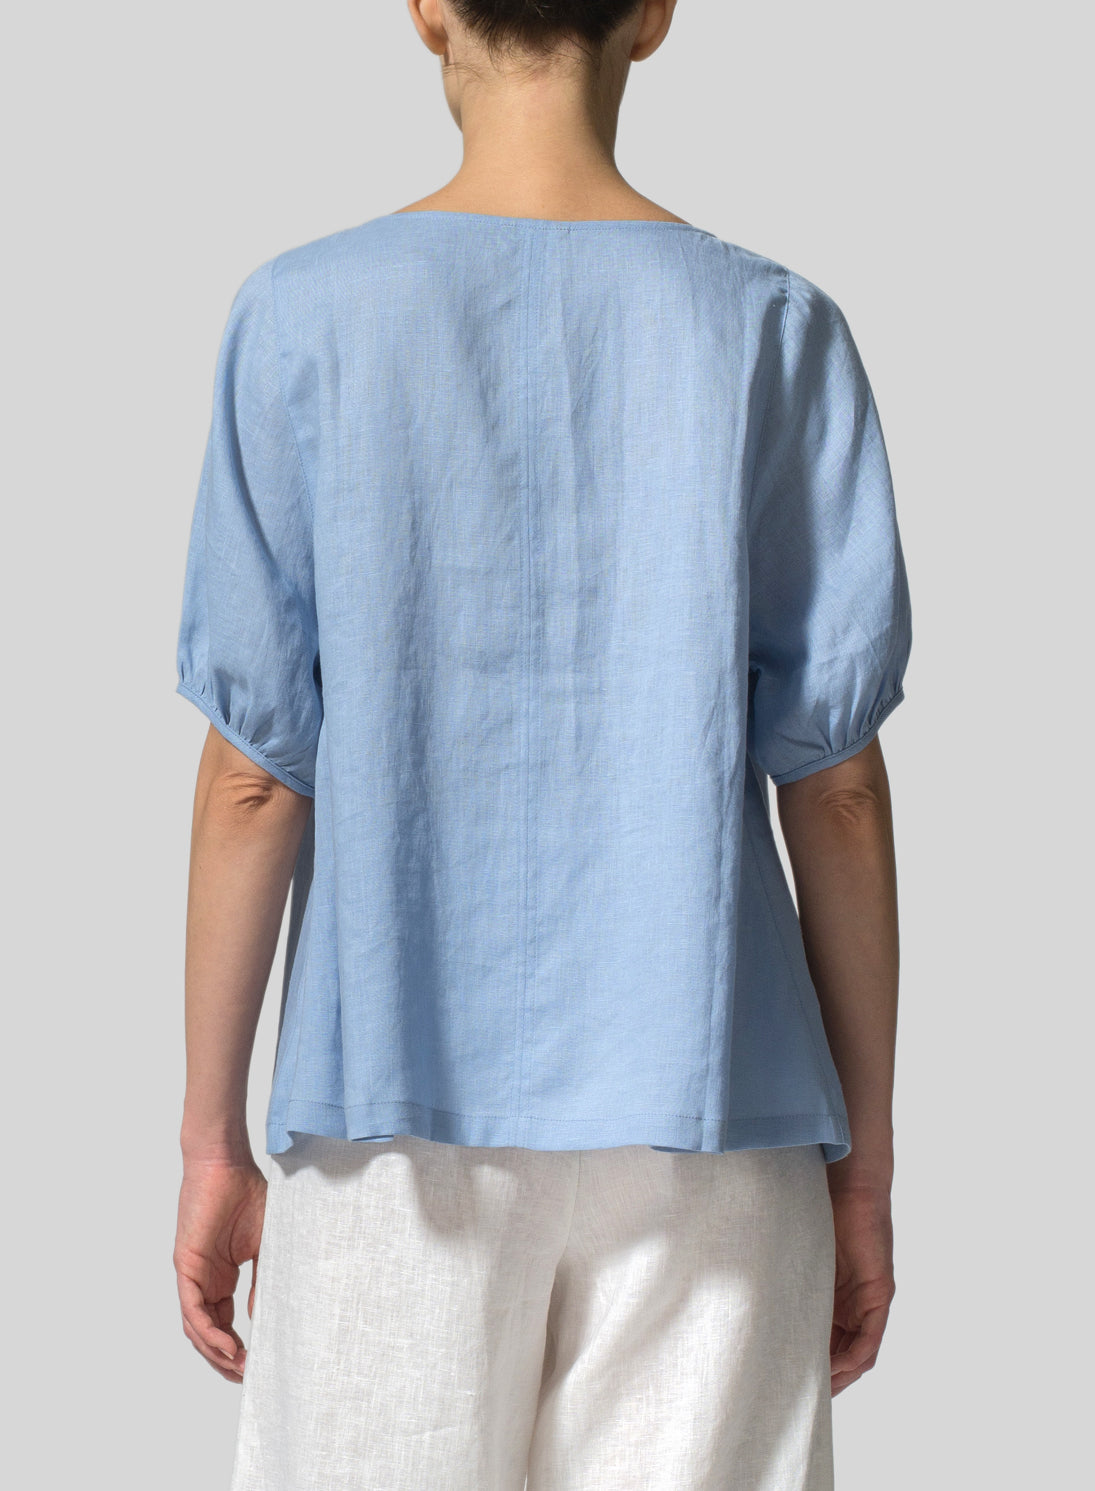 Cotton And Linen Drawstring Cuff Short Sleeve Top - boddysize